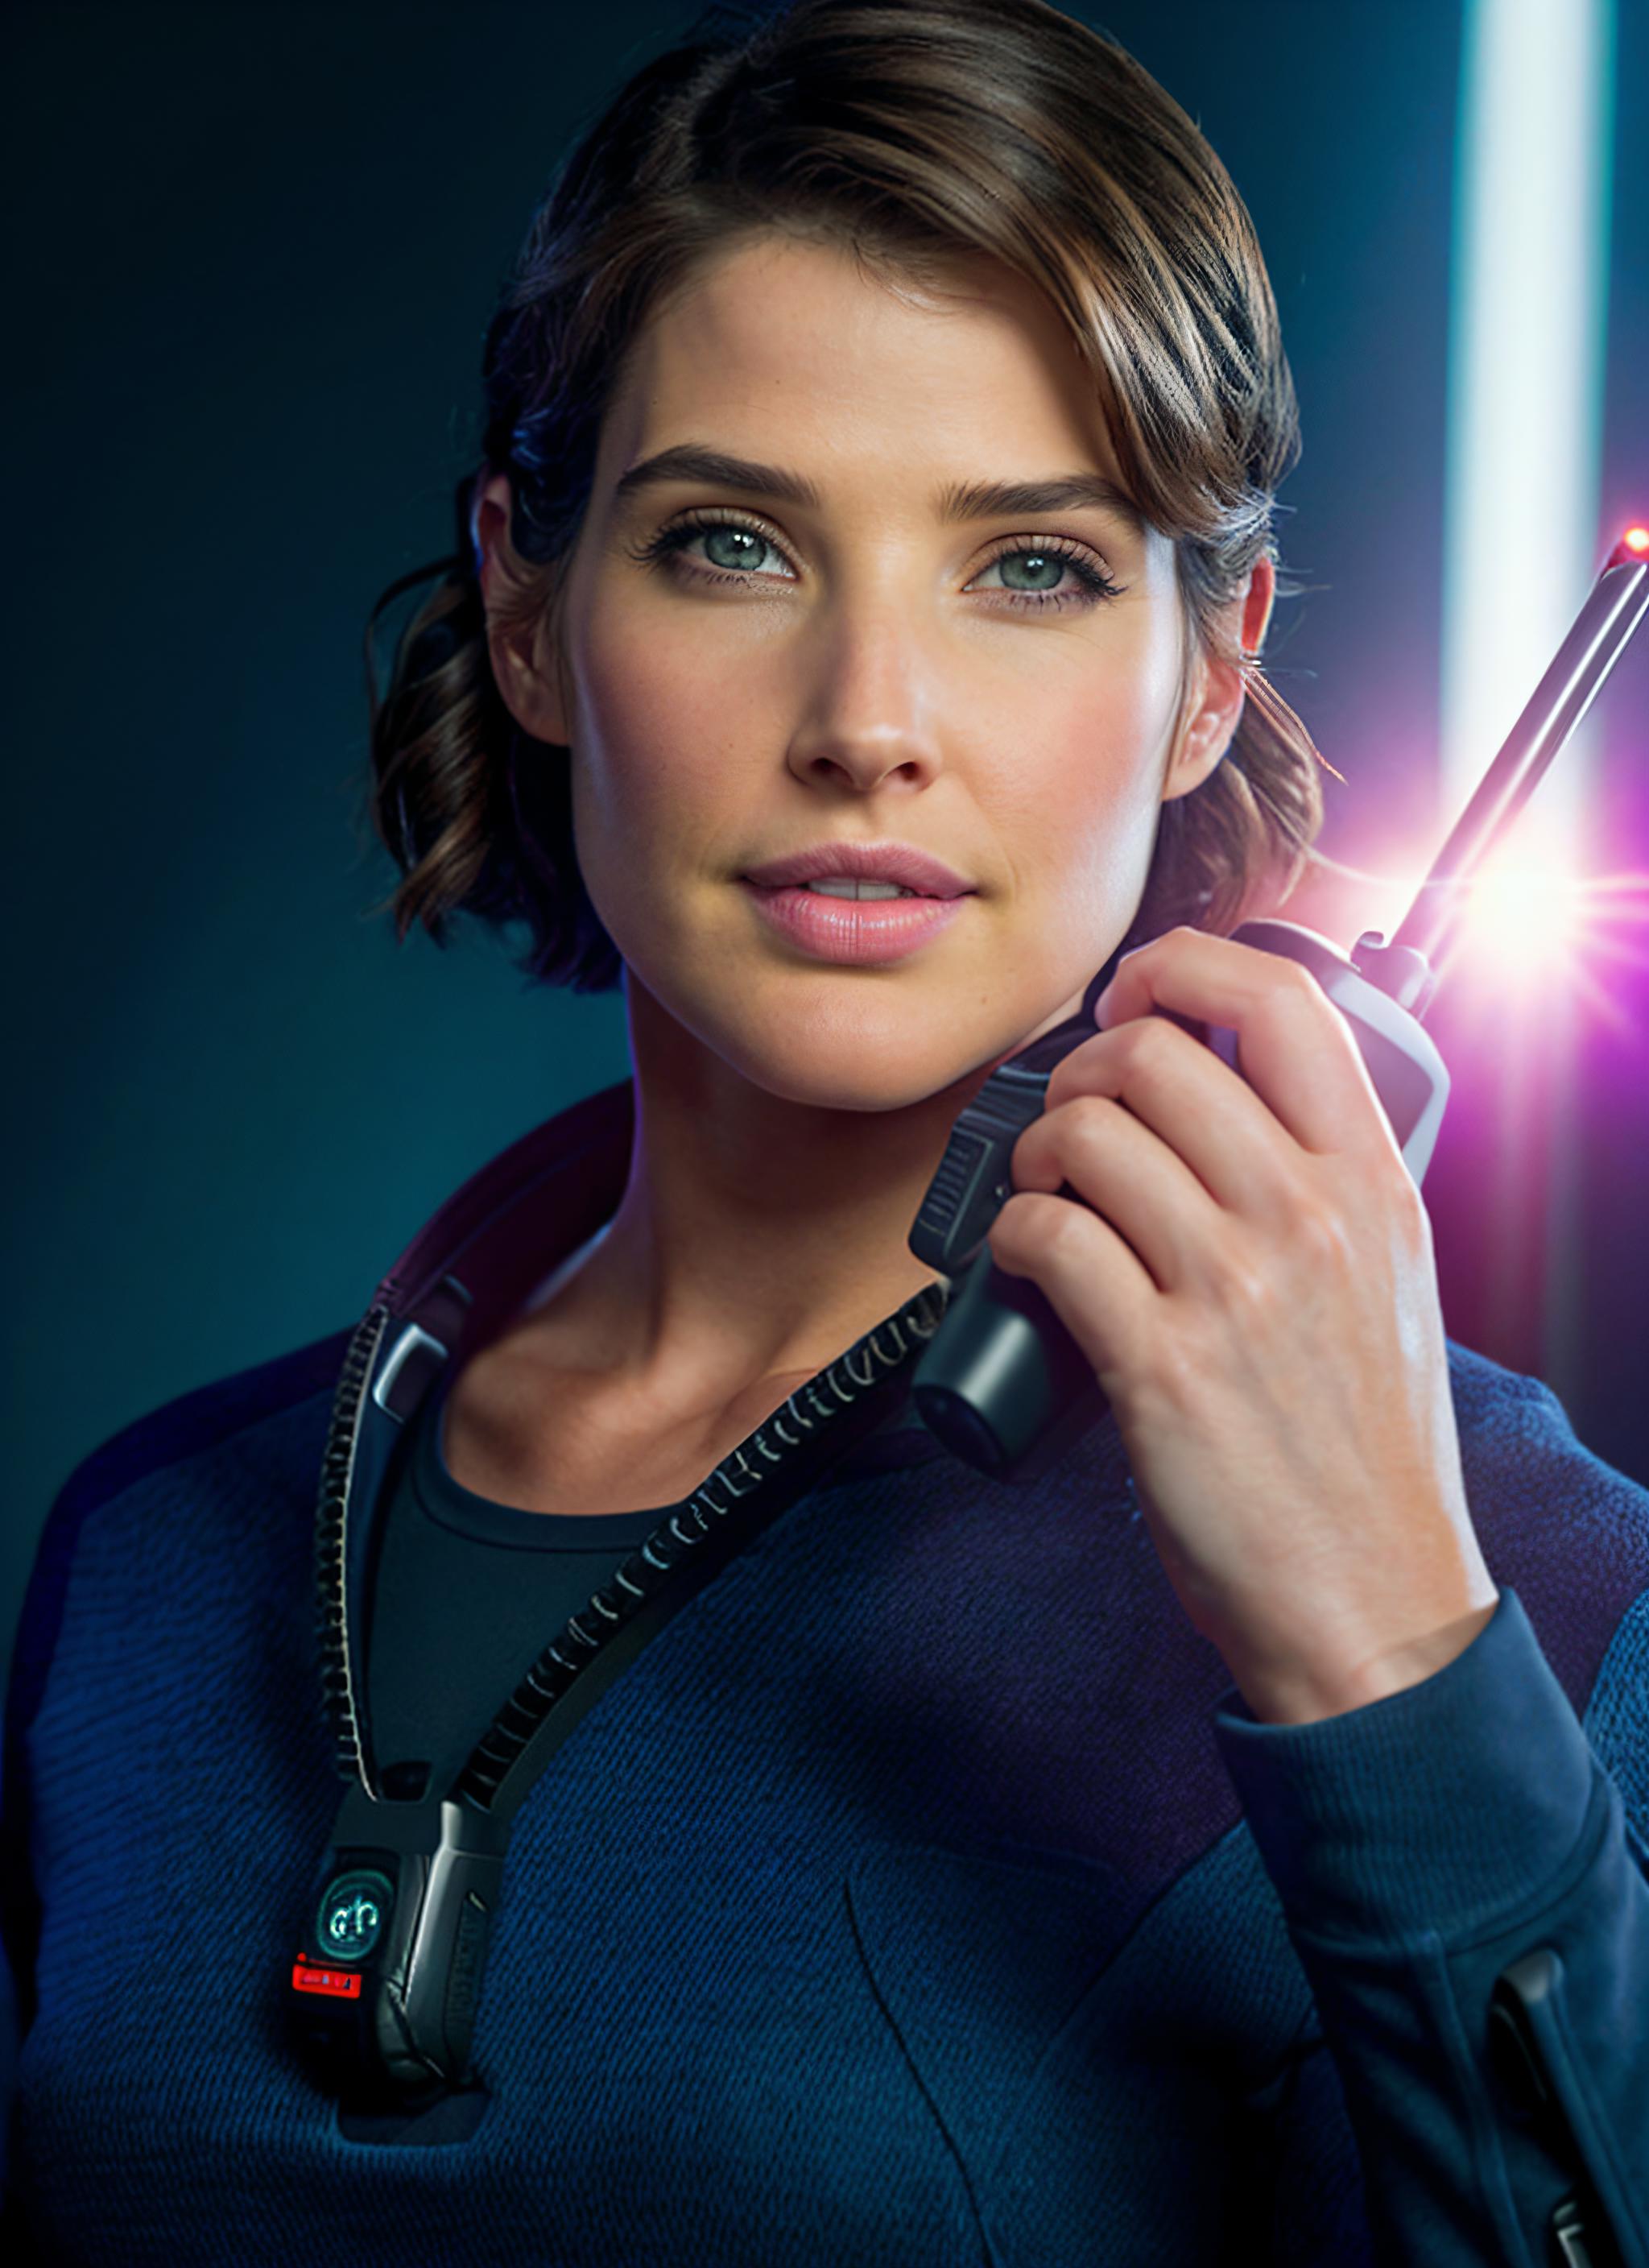 Cobie Smulders (Marvel's Maria Hill) image by astragartist